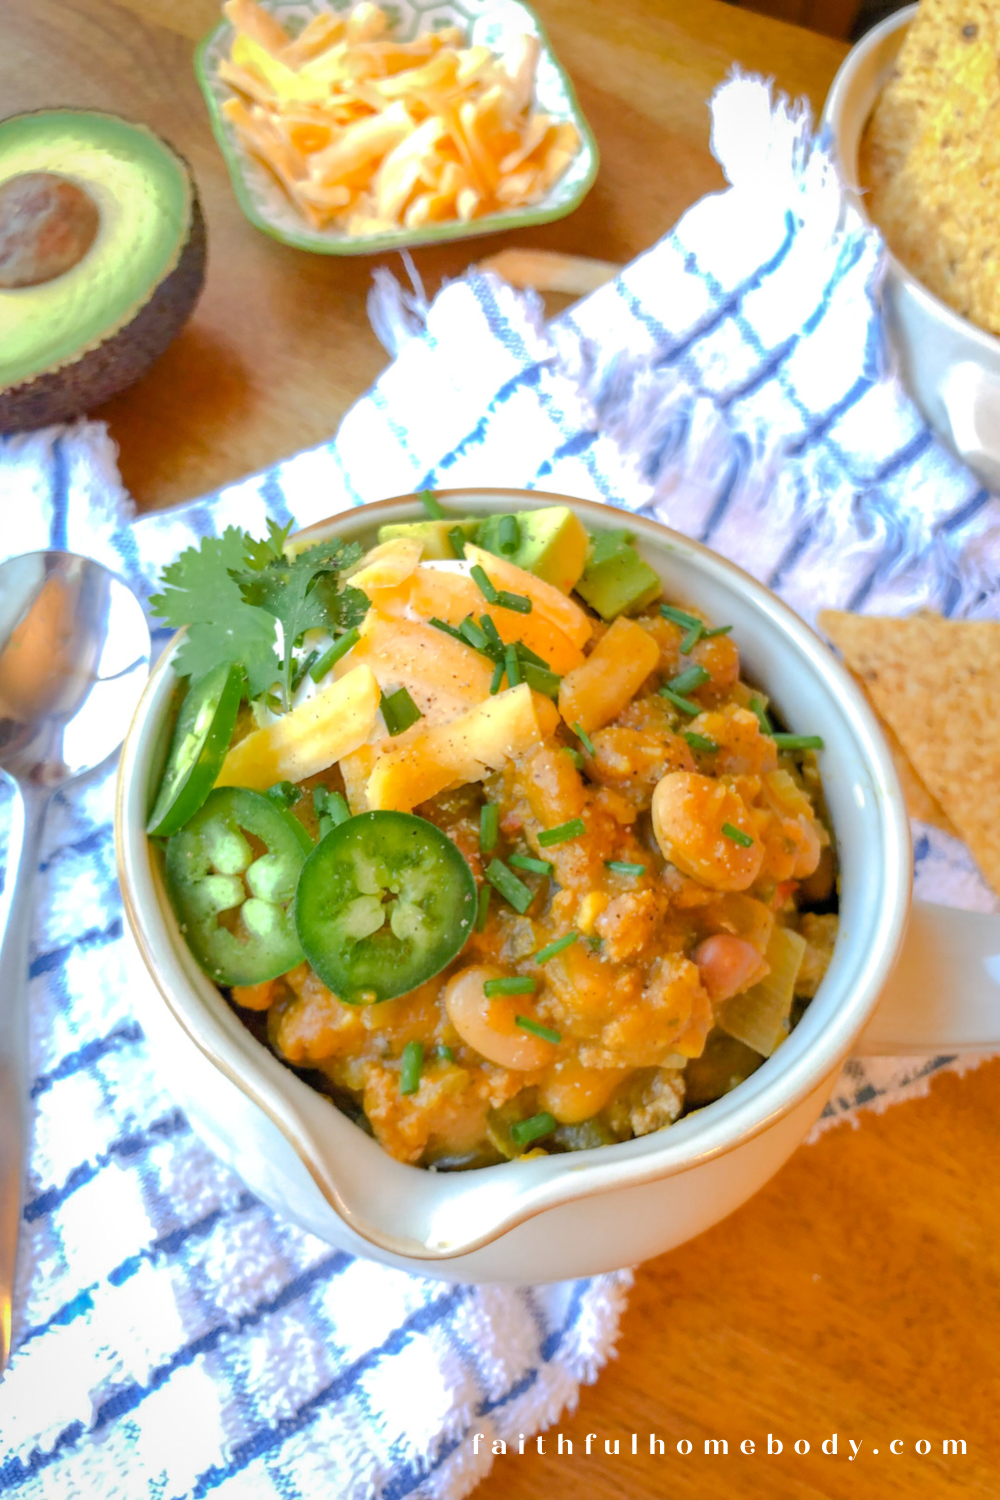 A white bowl contains Slow-Cooker Turkey and Two-Bean Pumpkin Chili..  The chili is topped with sour cream, shredded cheddar cheese, chives, sliced jalapenos, and cilantro.  The bowl is sitting on a white and blue kitchen towel with tortilla chips , avocado, and a dish with shredded cheese are in the background.